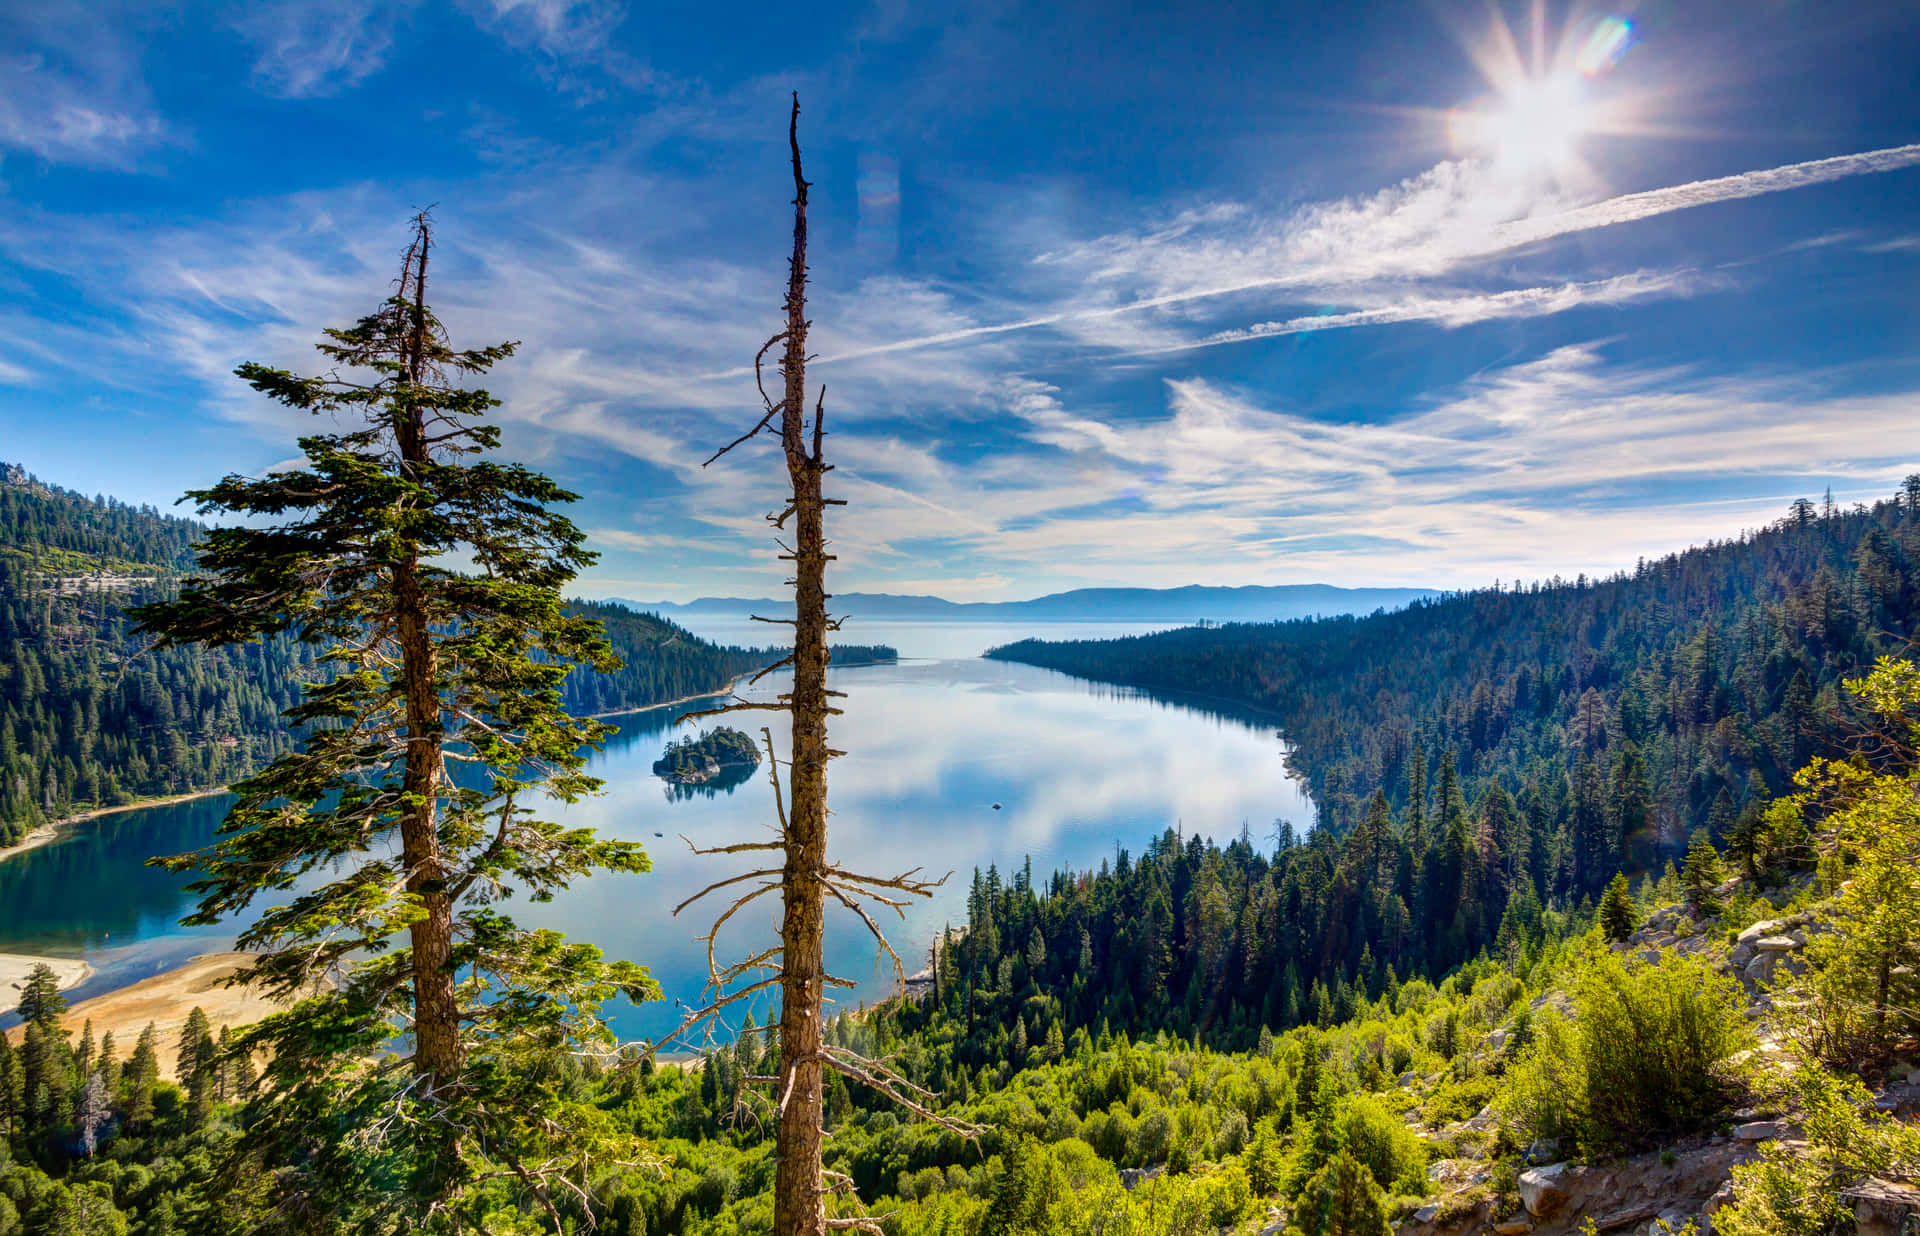 Be Treated to Raw Beauty and Adventure at Lake Tahoe Wallpaper